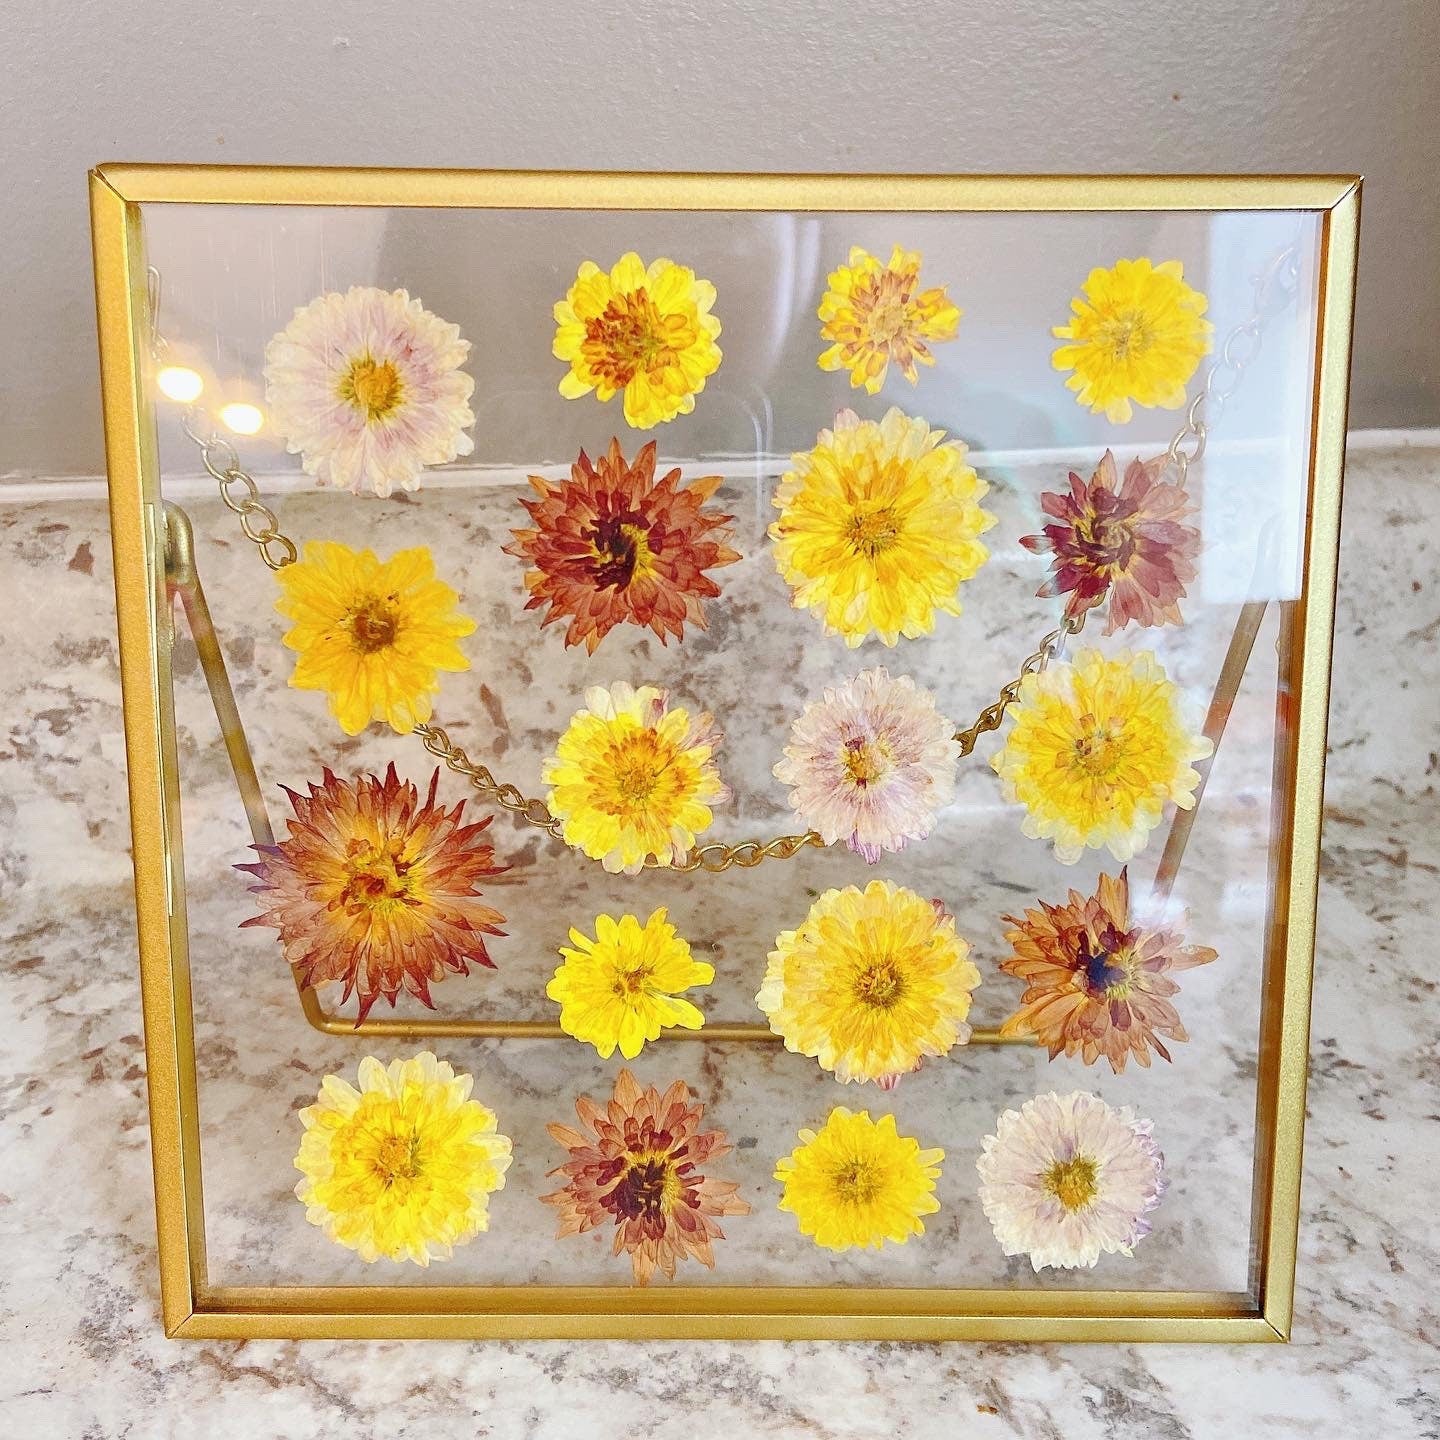 Pressed mums flower wall frame decor, Mother’s Day gift, wall hanging art, wedding decoration, wedding gift